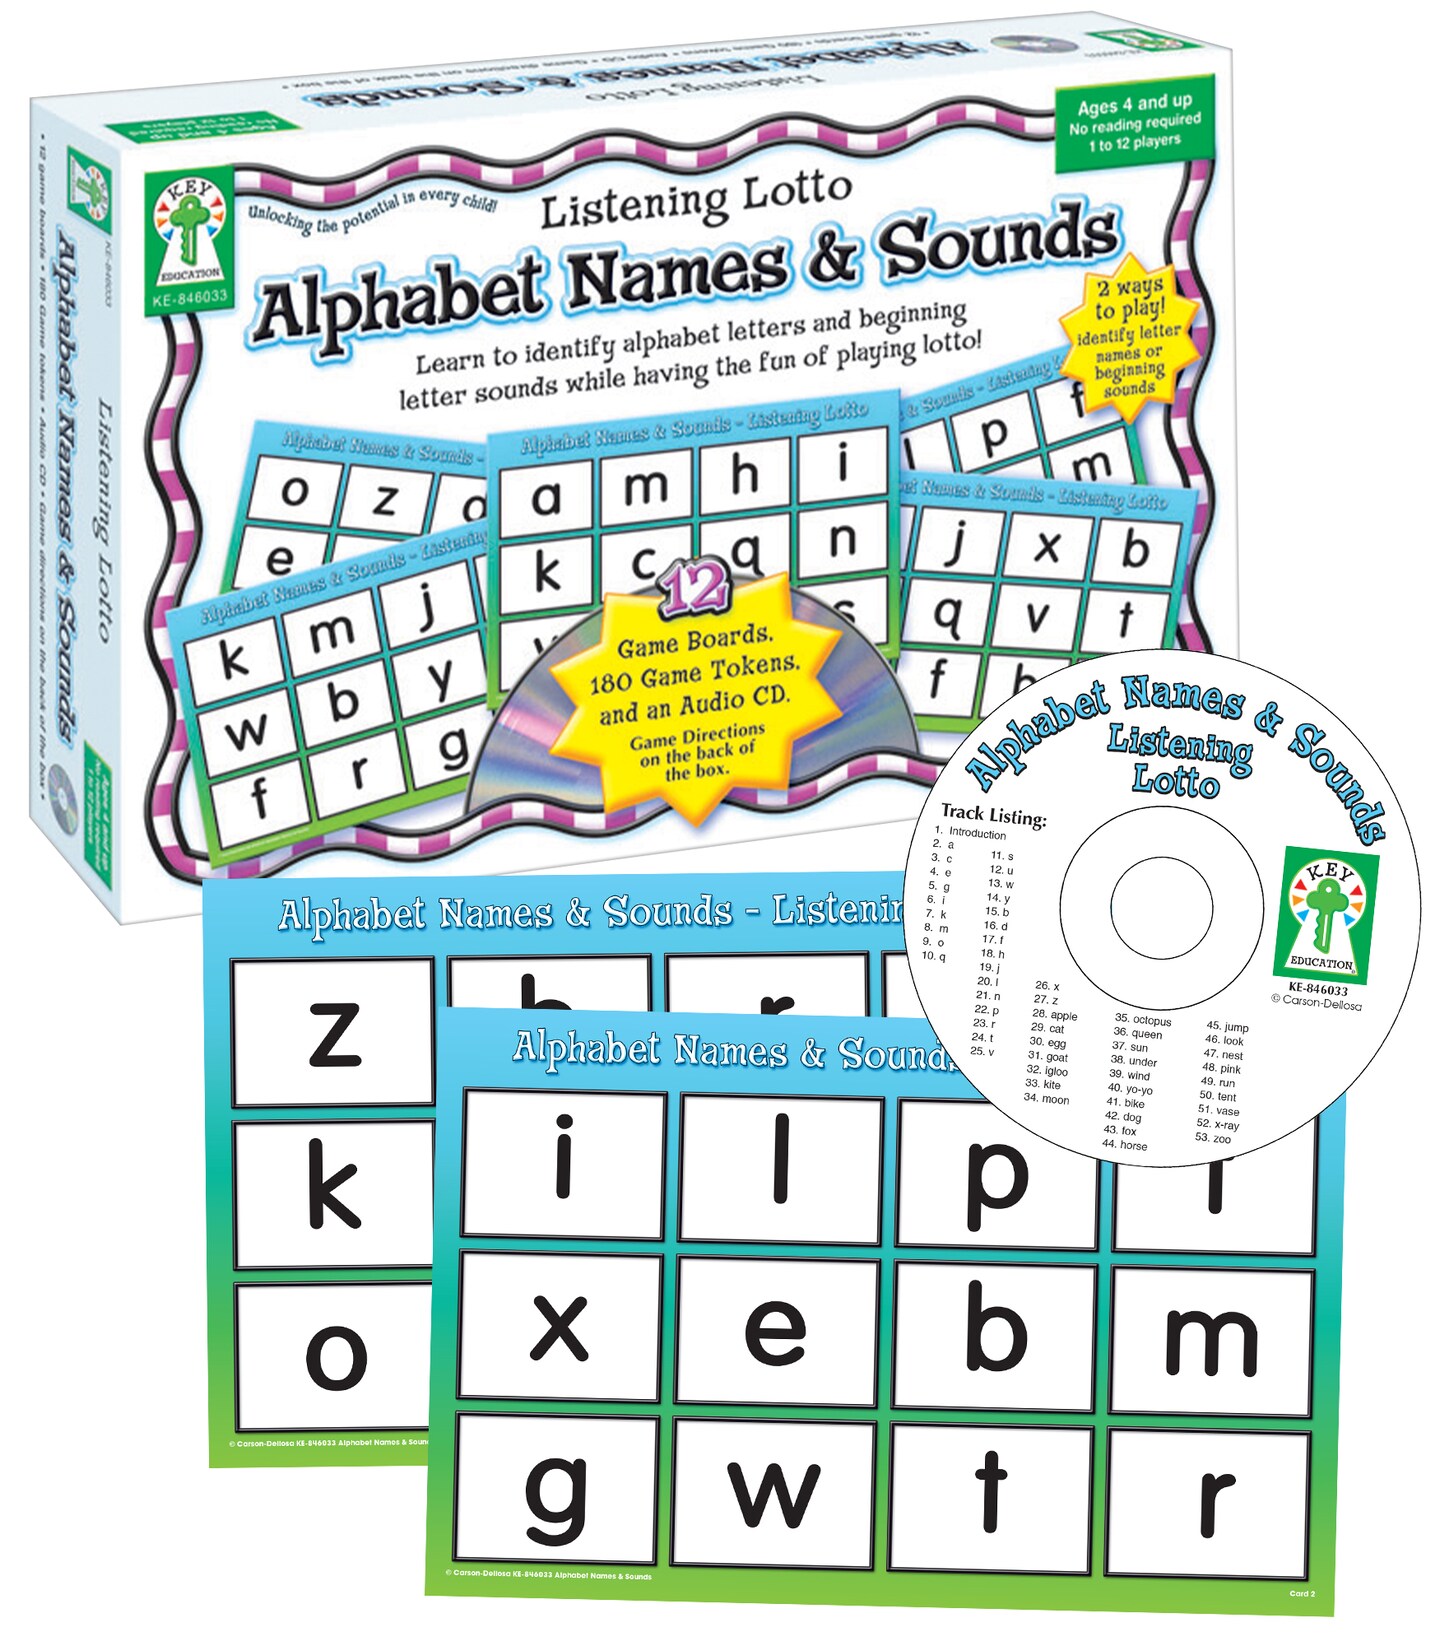 Listening Lotto: Alphabet Names and Sounds Matching Board Game, Pre-Reading, Auditory Alphabet Learning Educational Game With Audio CD, 1-12 Players, Ages 4+